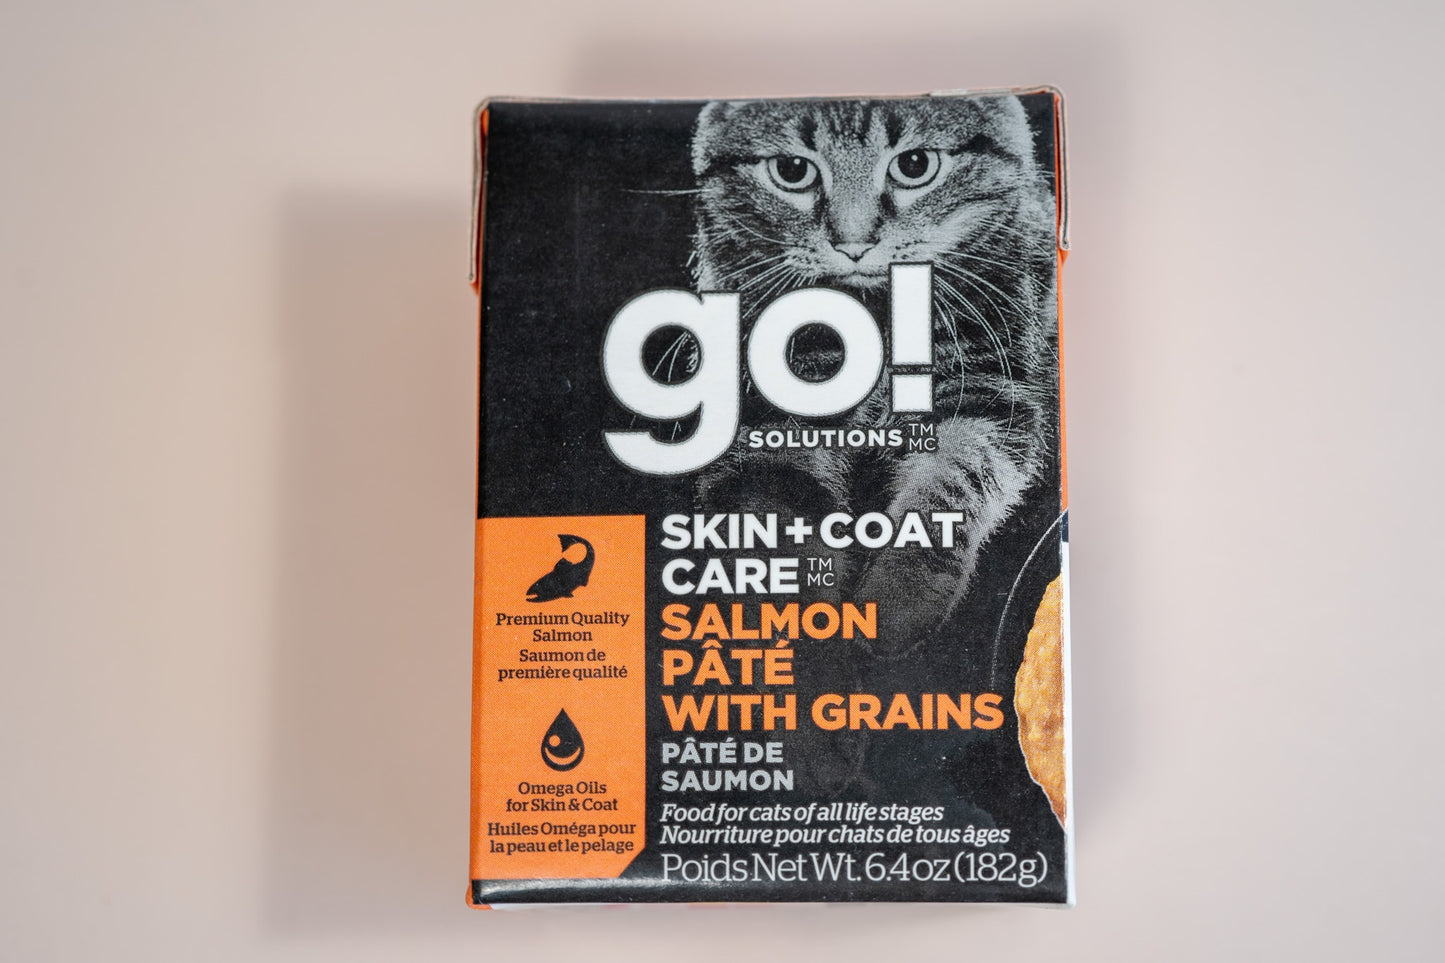 Food for cats with premium quality salmon and omega oils for skin and coat.